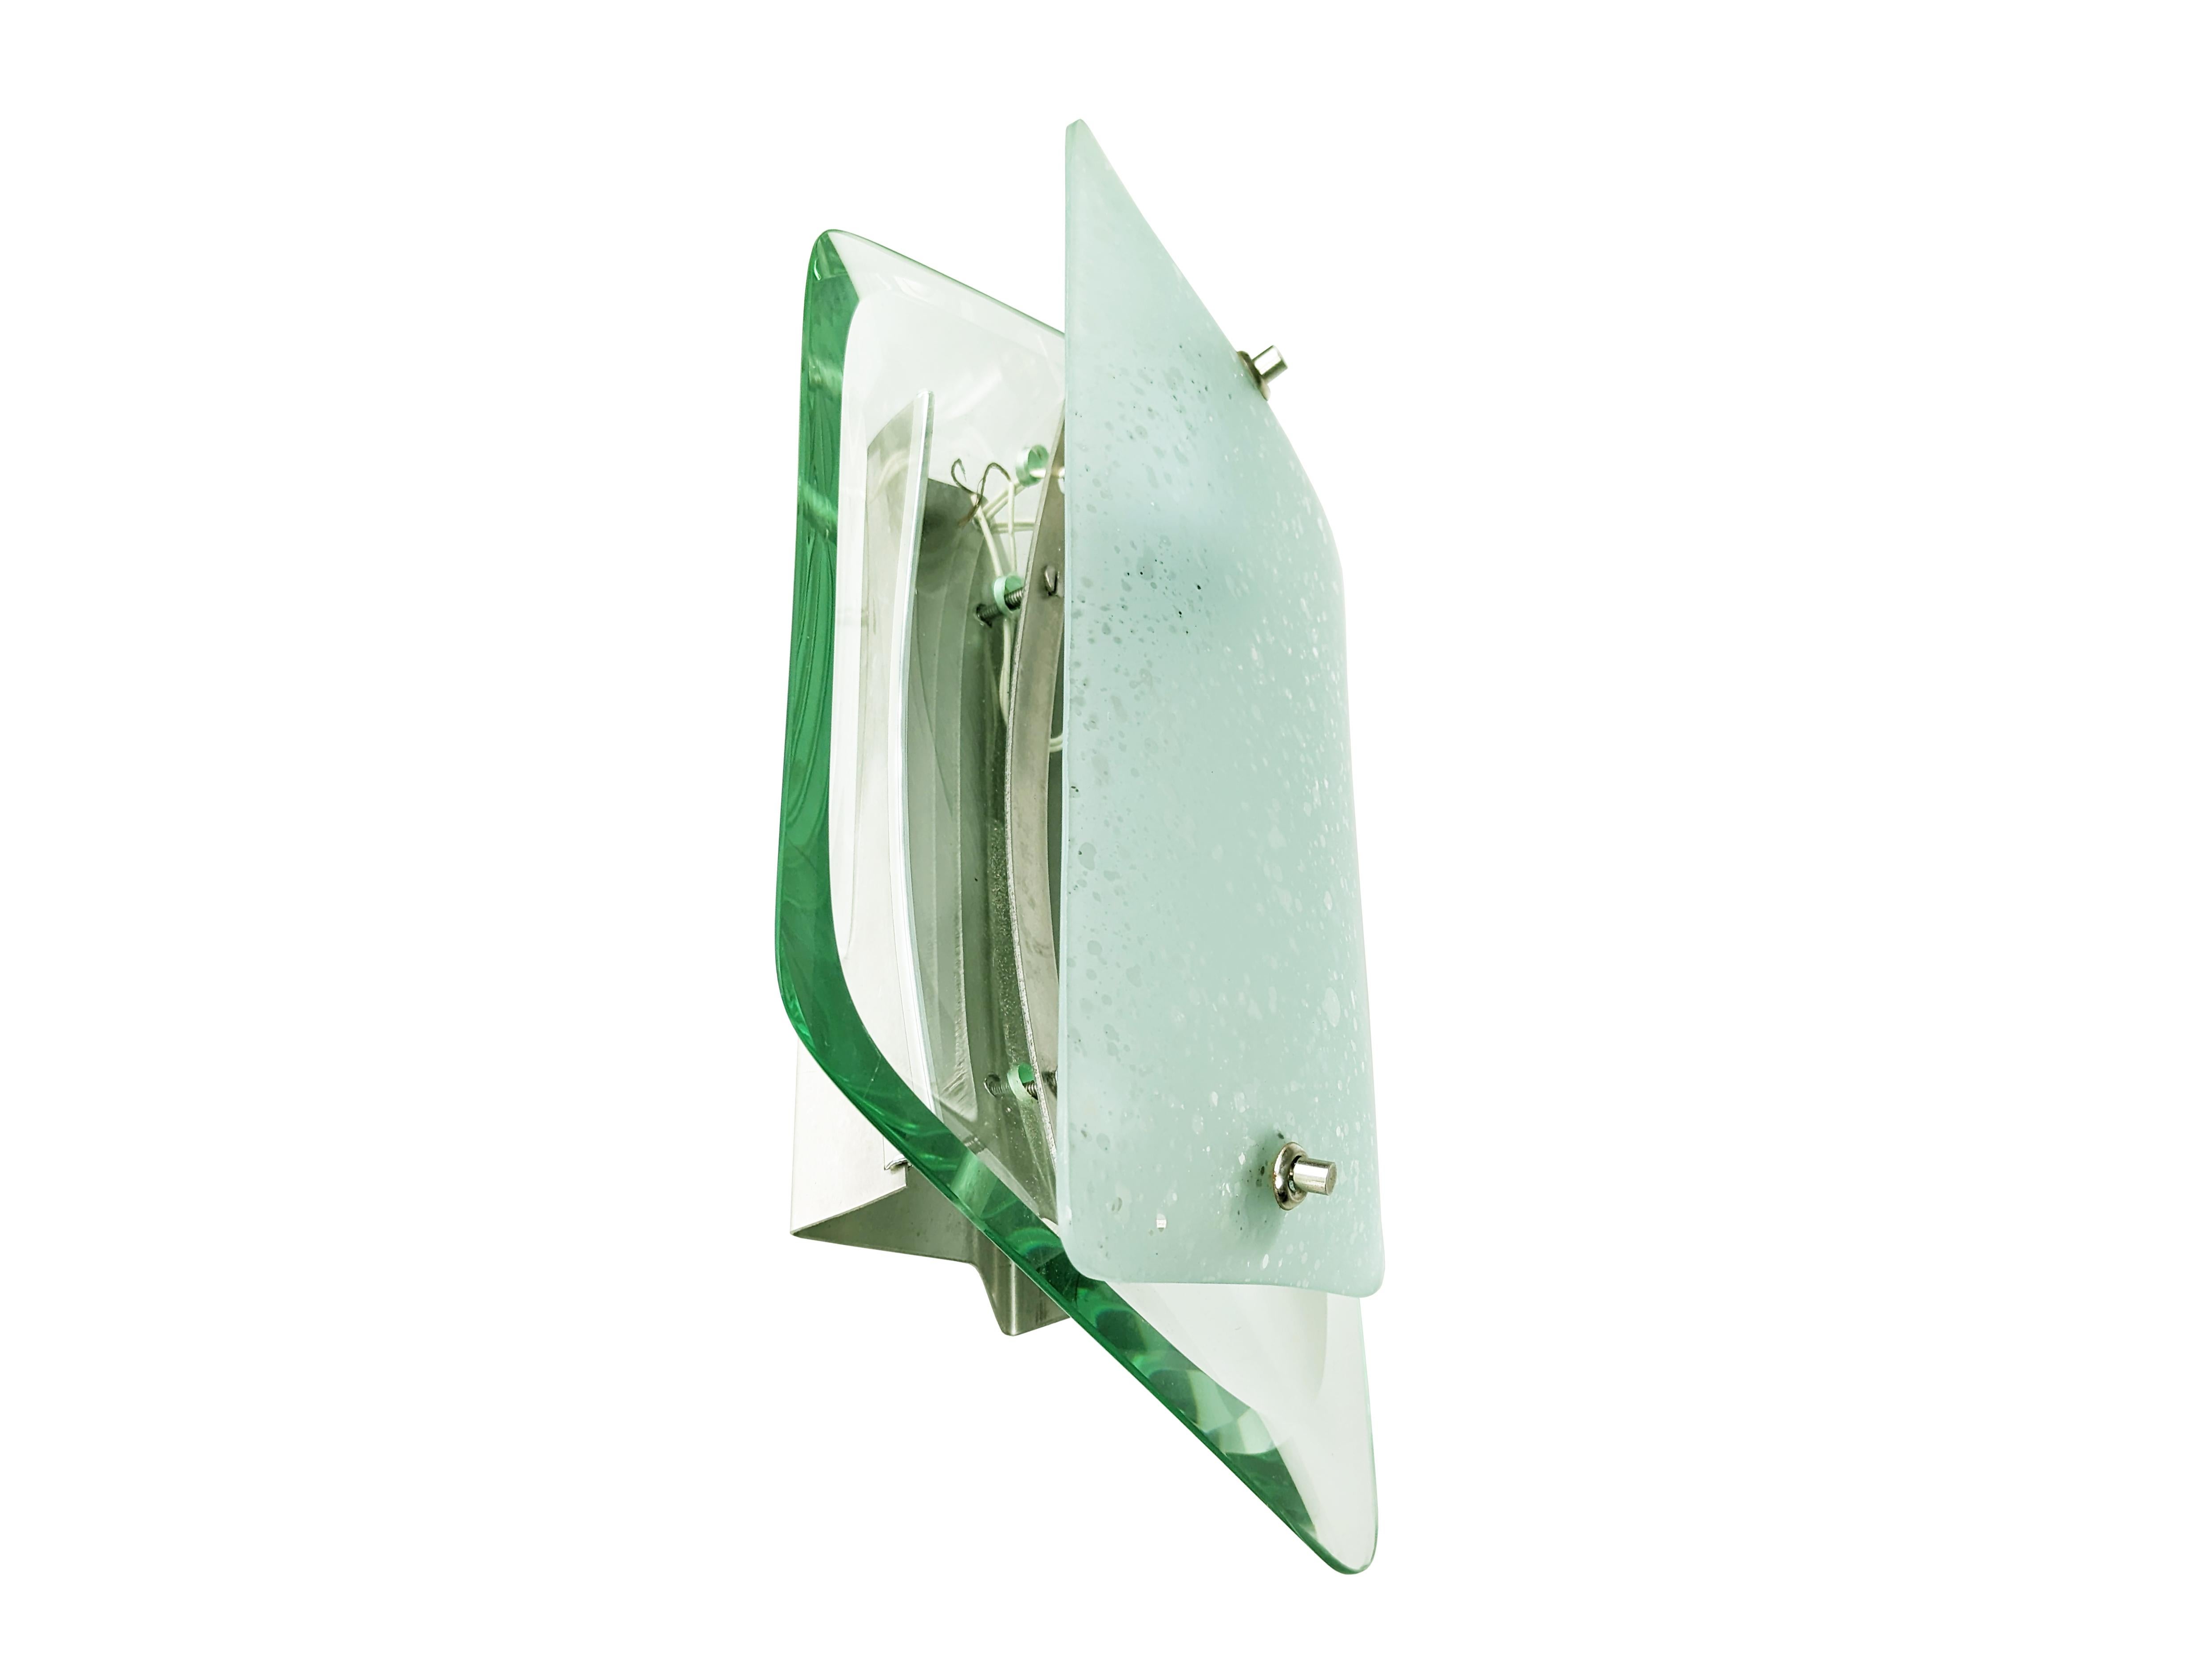 Wall light in chrome platedd metal, curved, sandblasted and ground glass made in the 1960s in the style of Fontana Arte. Brand new condition. The lamp is equipped with E14 lamp socket.